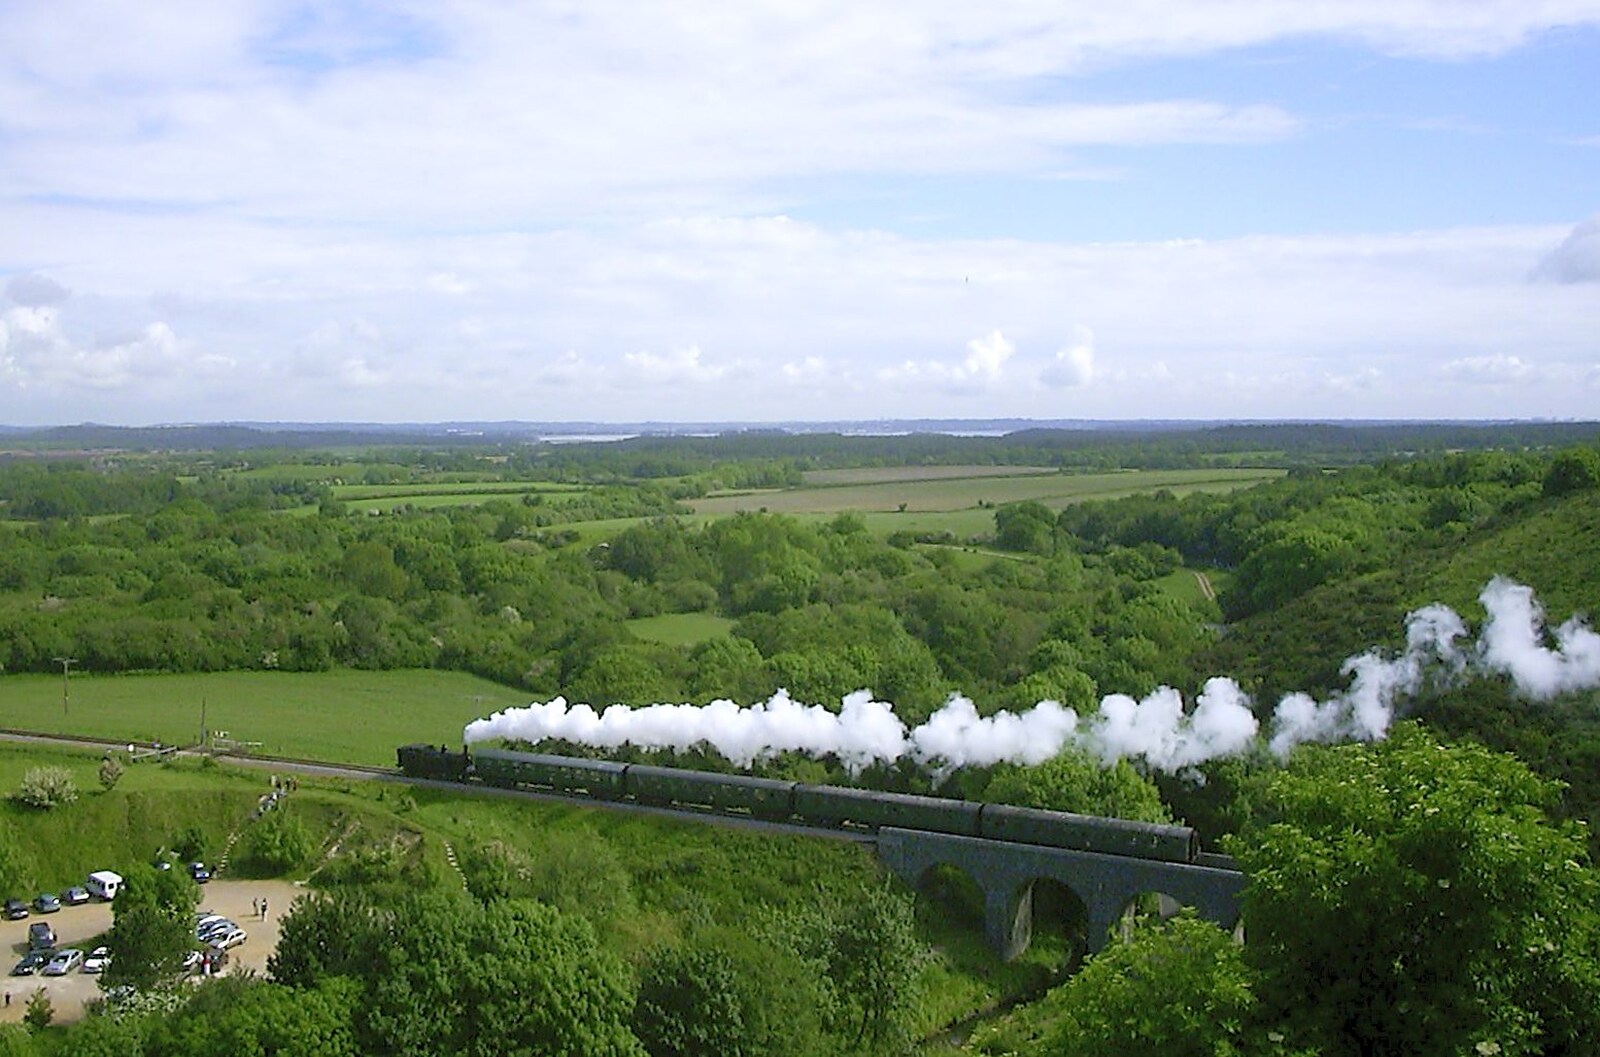 Corfe Castle Camping, Corfe, Dorset - 30th May 2004: The Swanage Steam Train trundles by